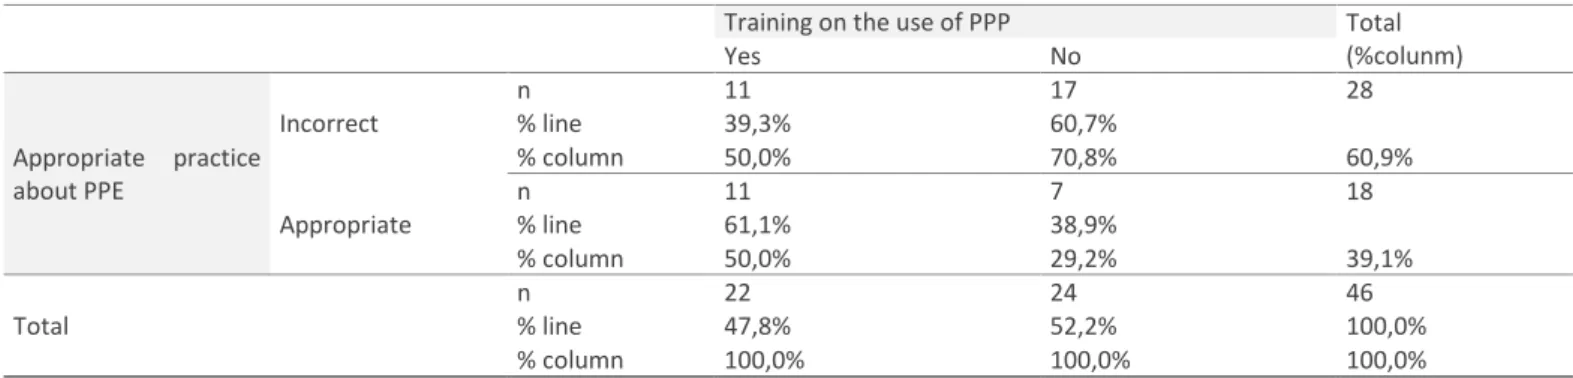 Table 4: Relation between Appropriate practices on the use of PPE and Training on the use of PPP 